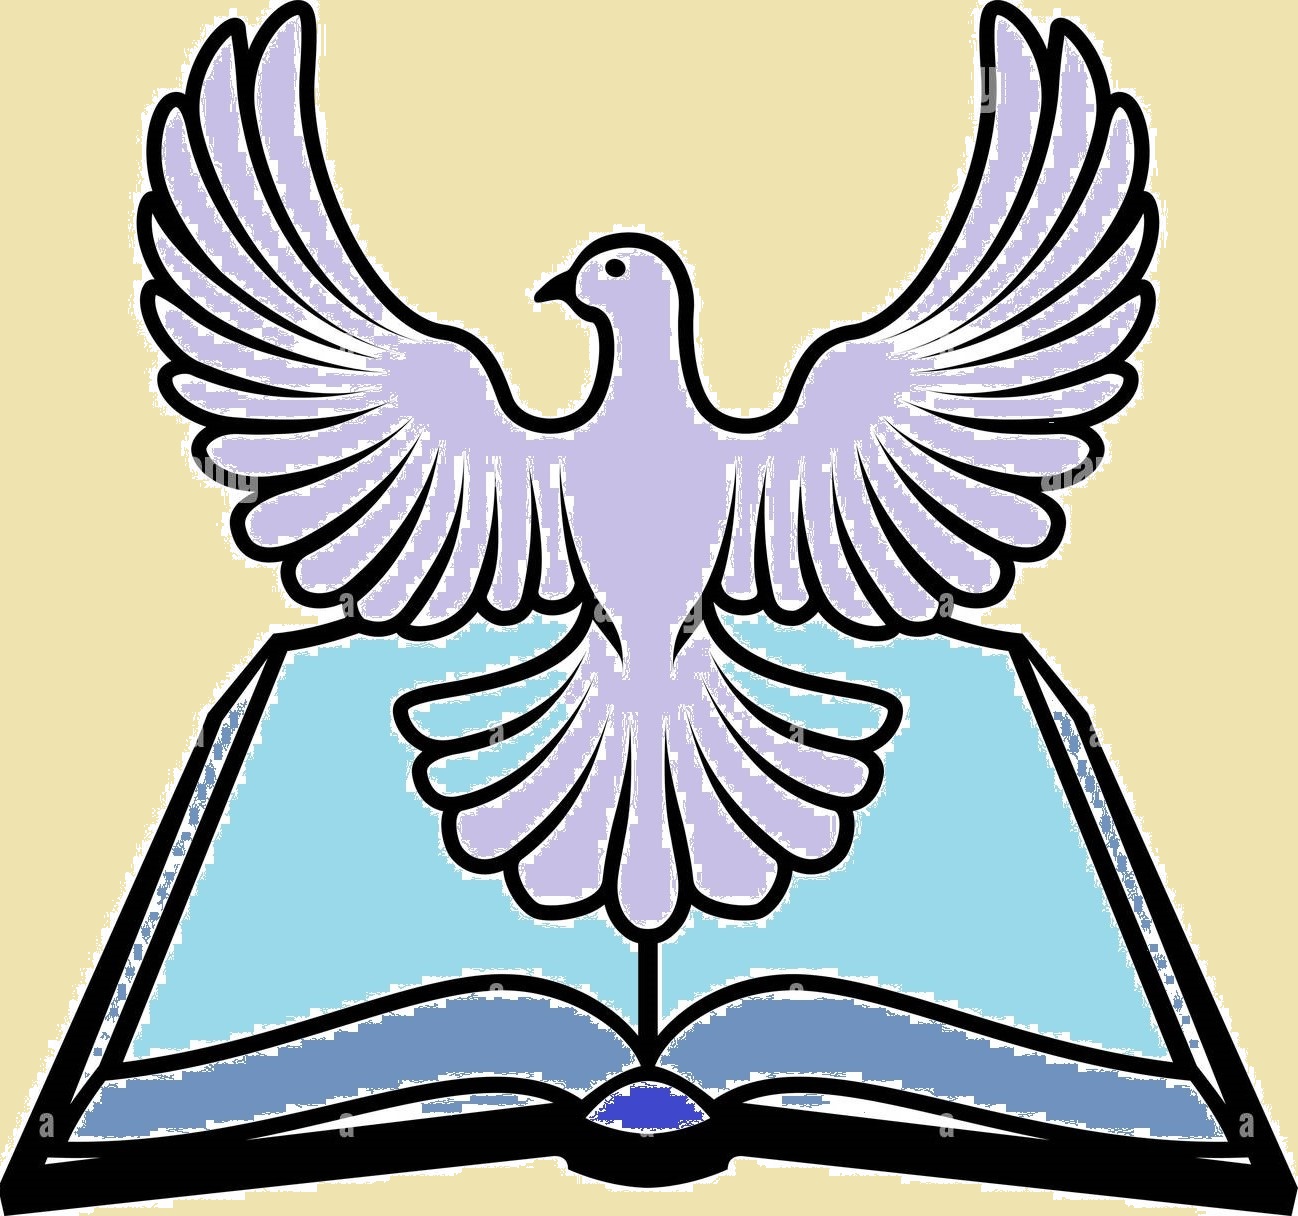 christian-bible-with-the-holy-spirit-in-the-form-of-a-white-dove-DNKTK7.jpg